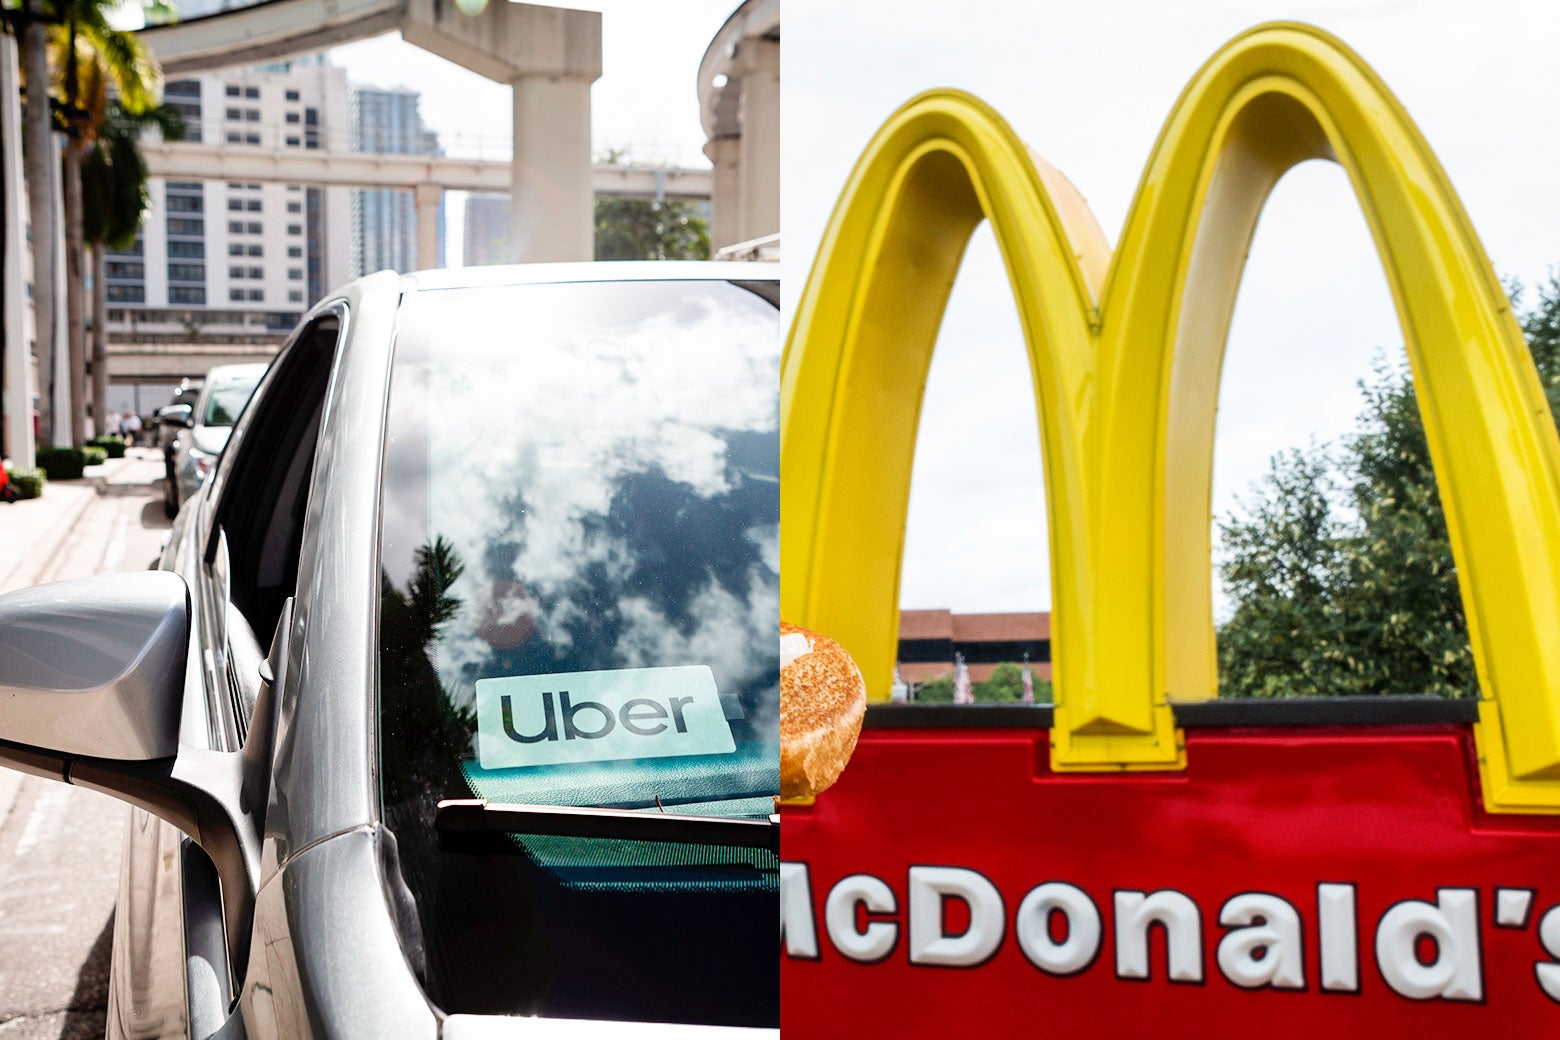 A car with an Uber sticker in the front window and a McDonald's golden arches sign.